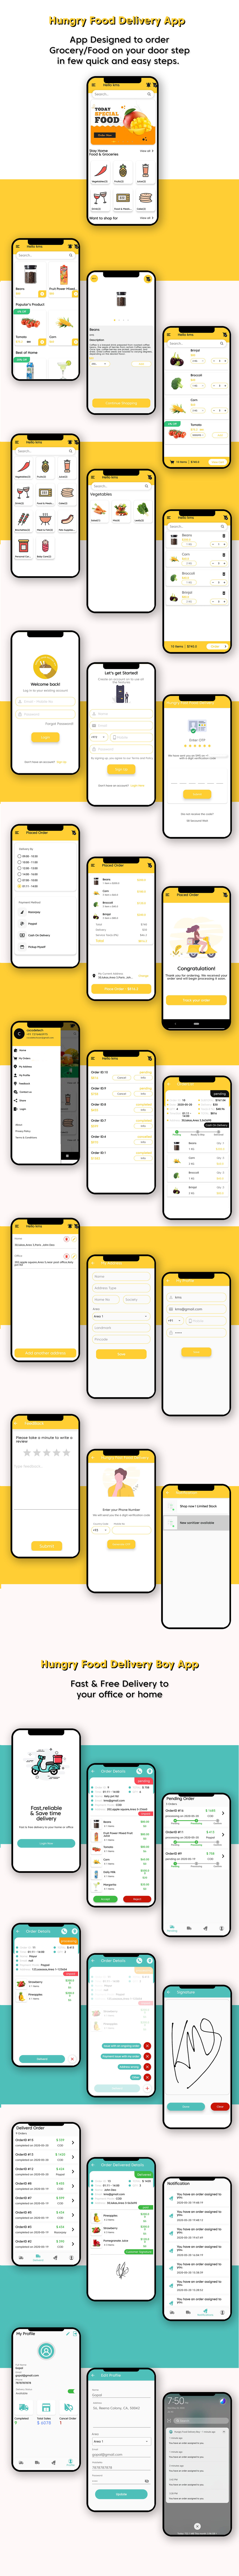 Hungry Grocery Delivery Android App and Delivery Boy App with Interactive Admin Panel - 4